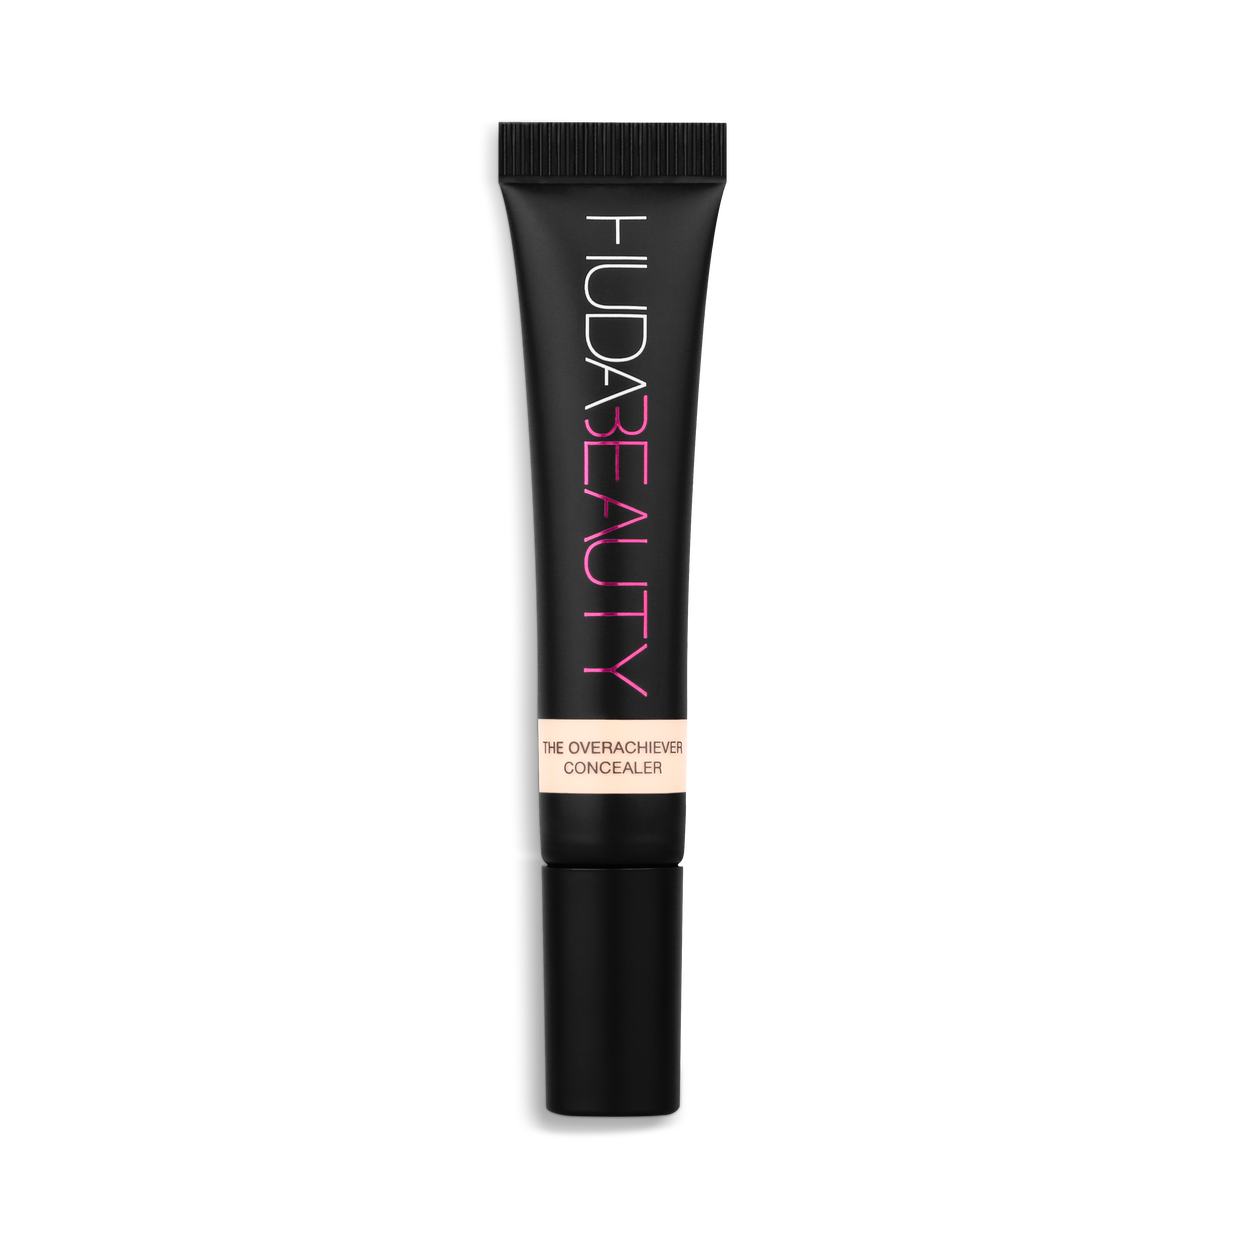 Huda Beauty The Overachiever Concealer - Whipped Cream 00G